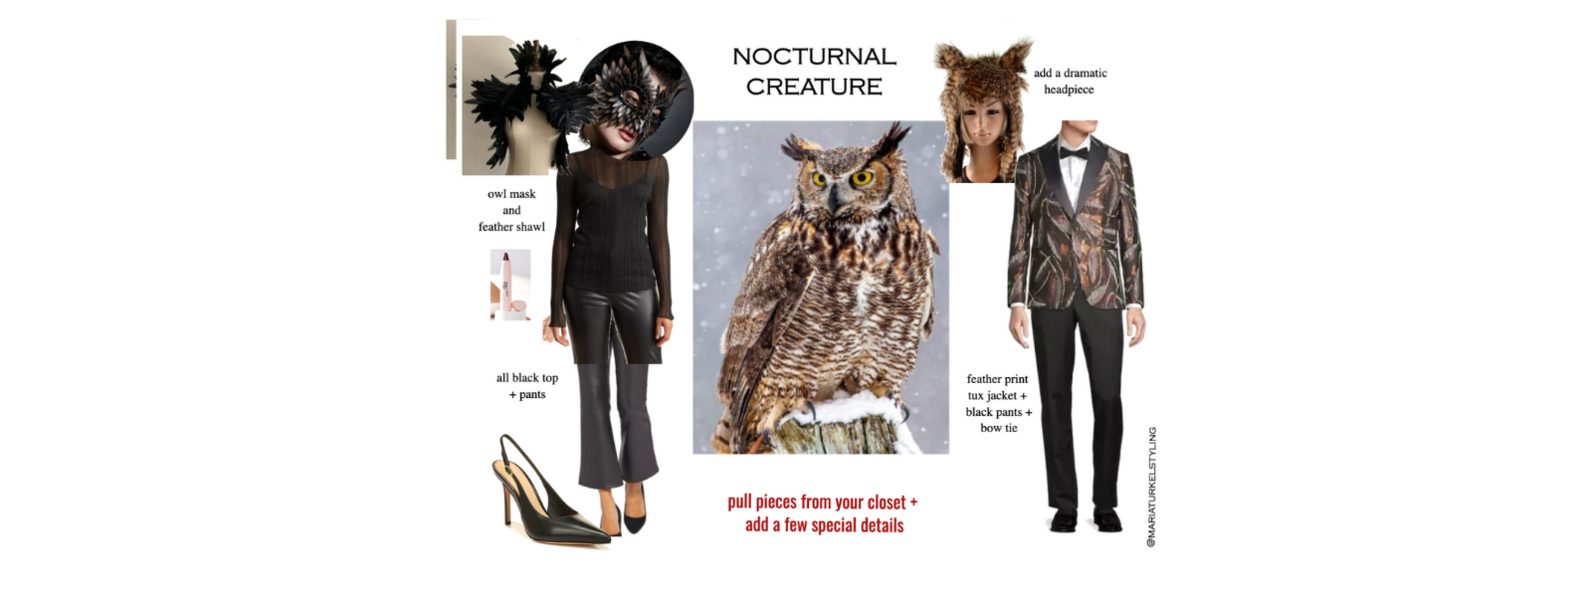 A collage of clothing items and accessories to resemble a Great Horned Owl.